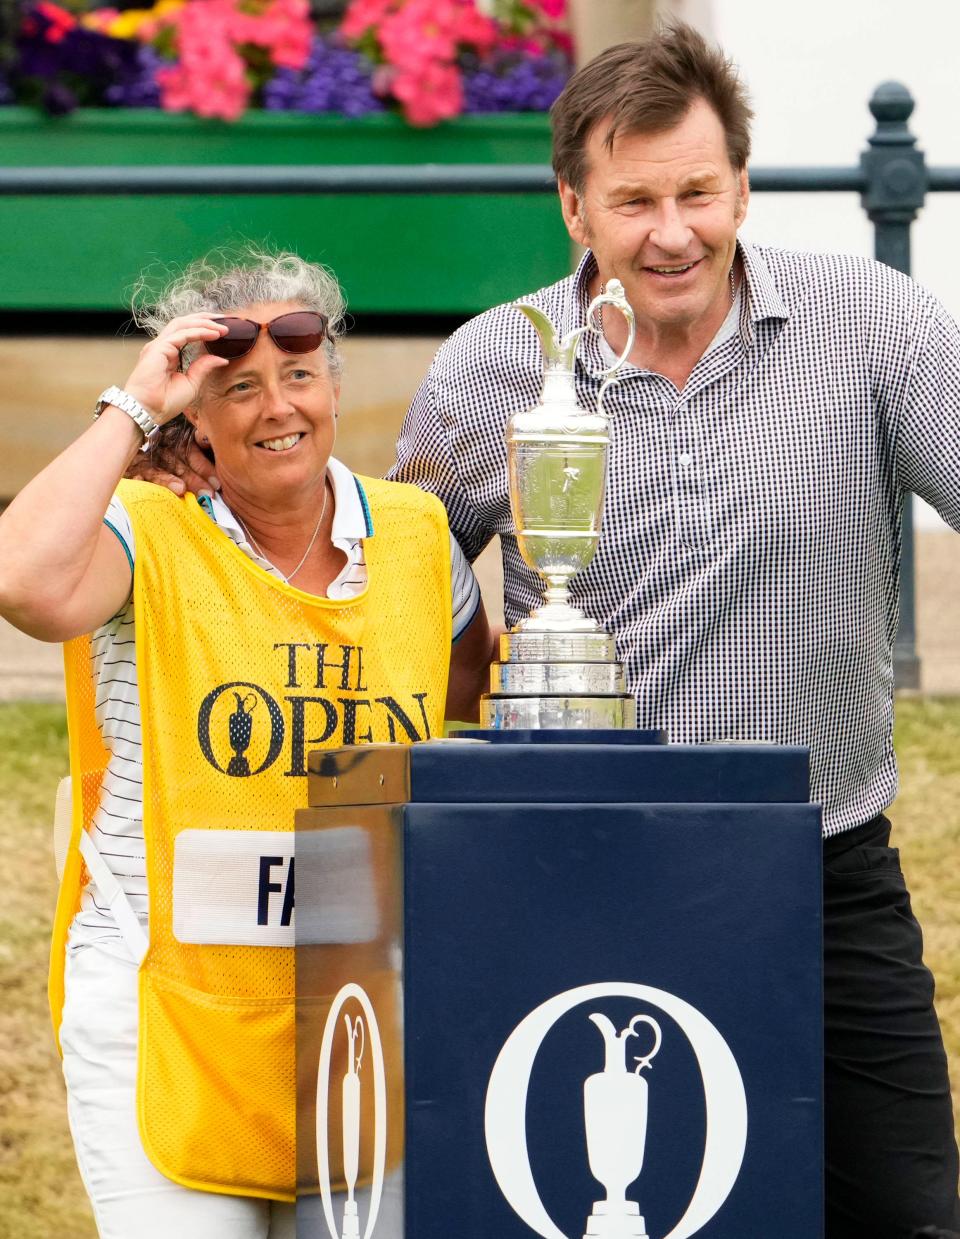 Jul 11, 2022; St. Andrews, SCT; Caddie Fanny Sunesson and Sir Nick Faldo pose for a photograph with the Claret Jug during the R&A Celebration of Champions four-hole challenge at the 150th Open Championship golf tournament at St. Andrews Old Course.